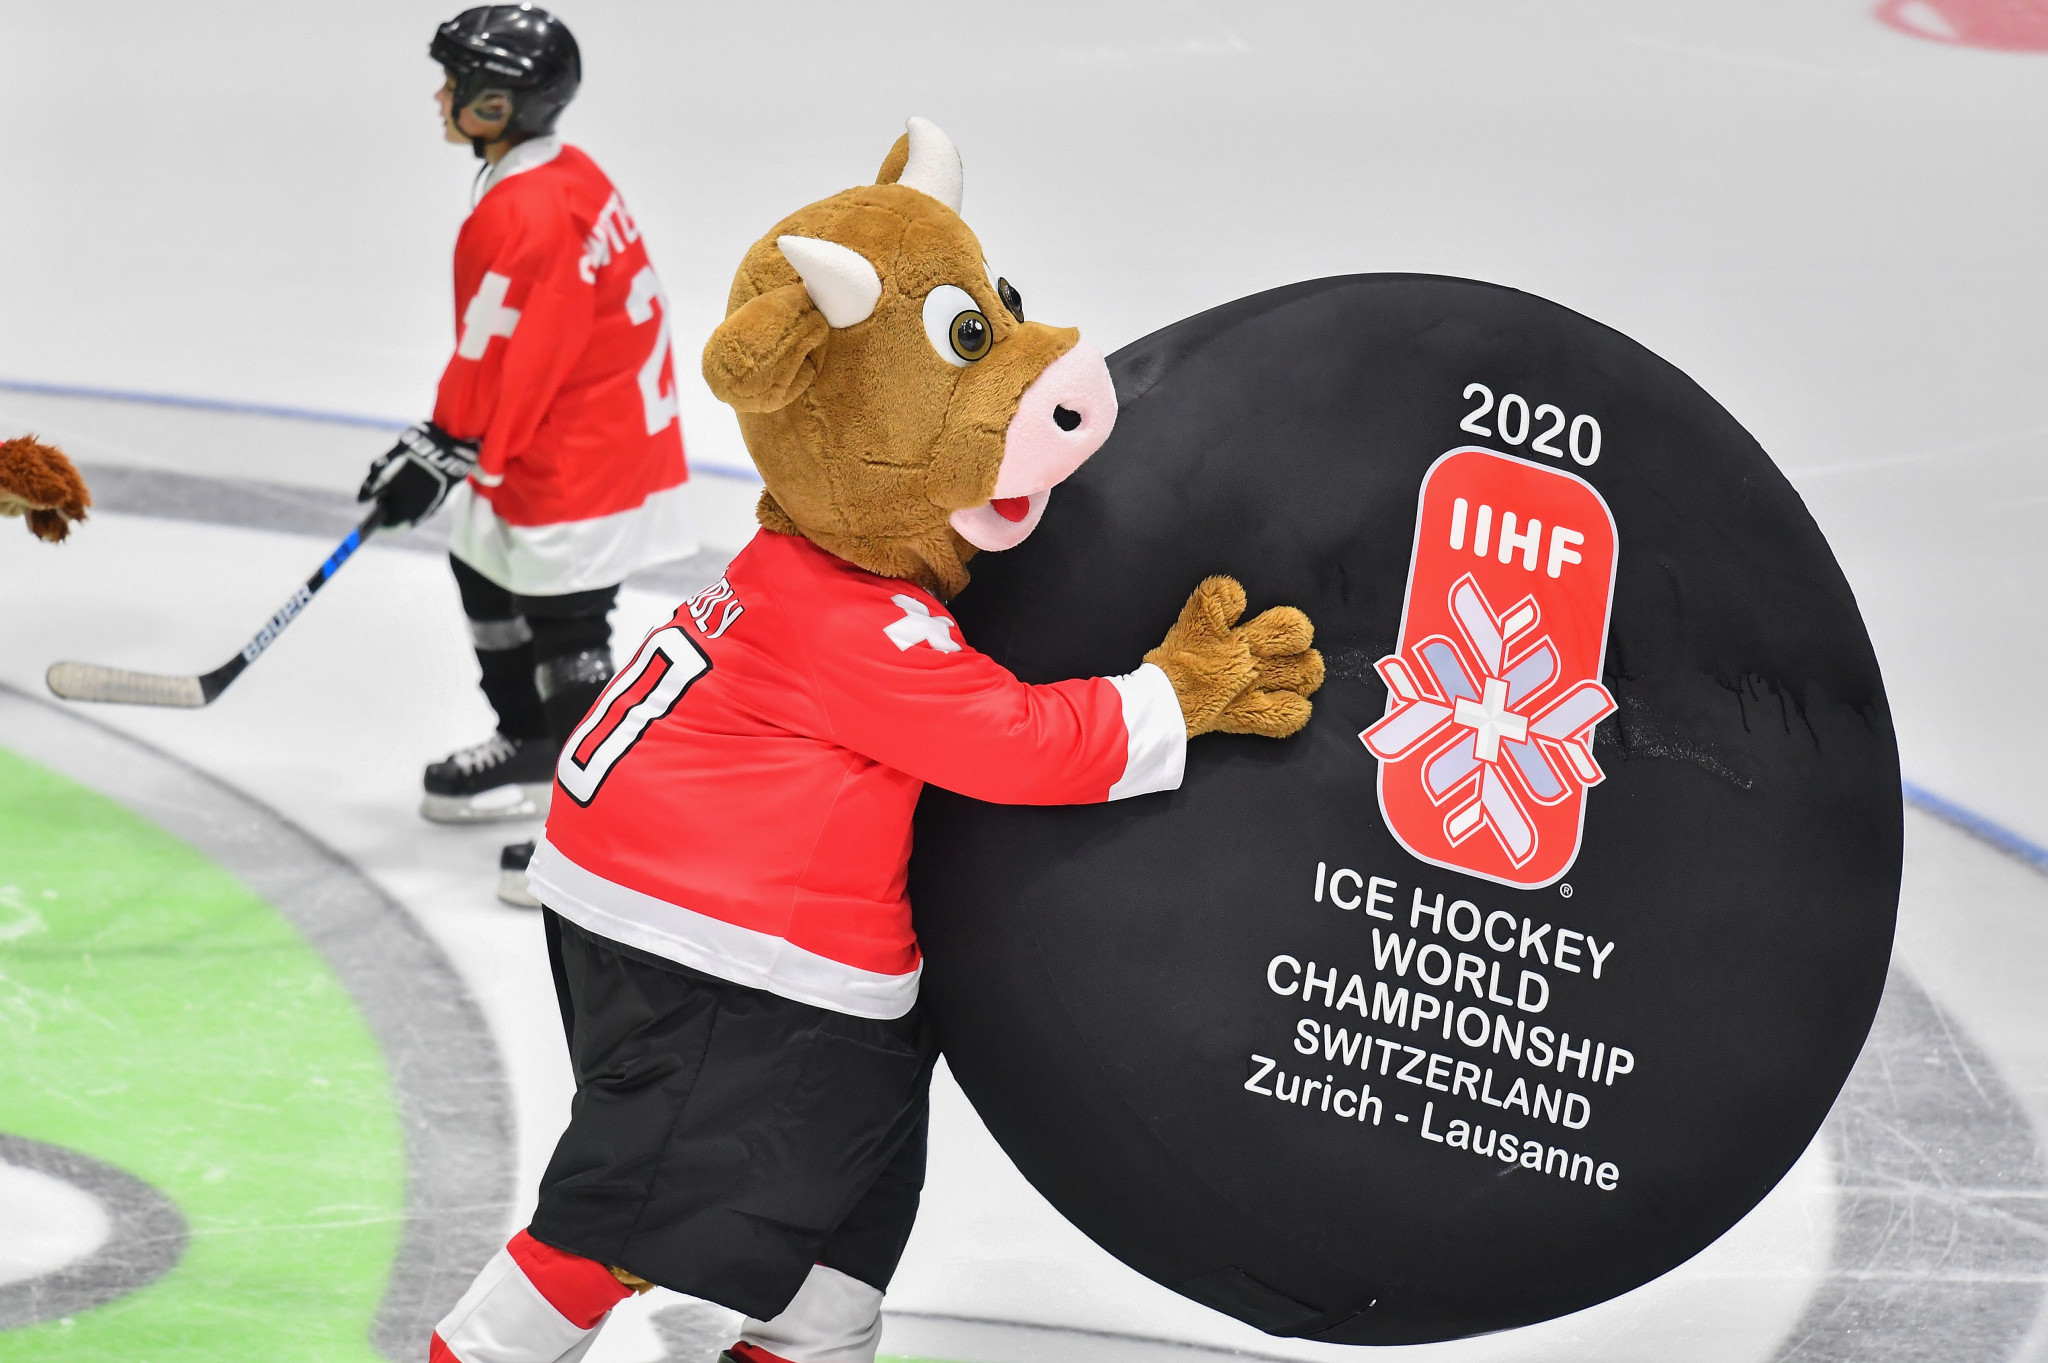 Ticket sales for 2020 IIHF World Championship poised to begin